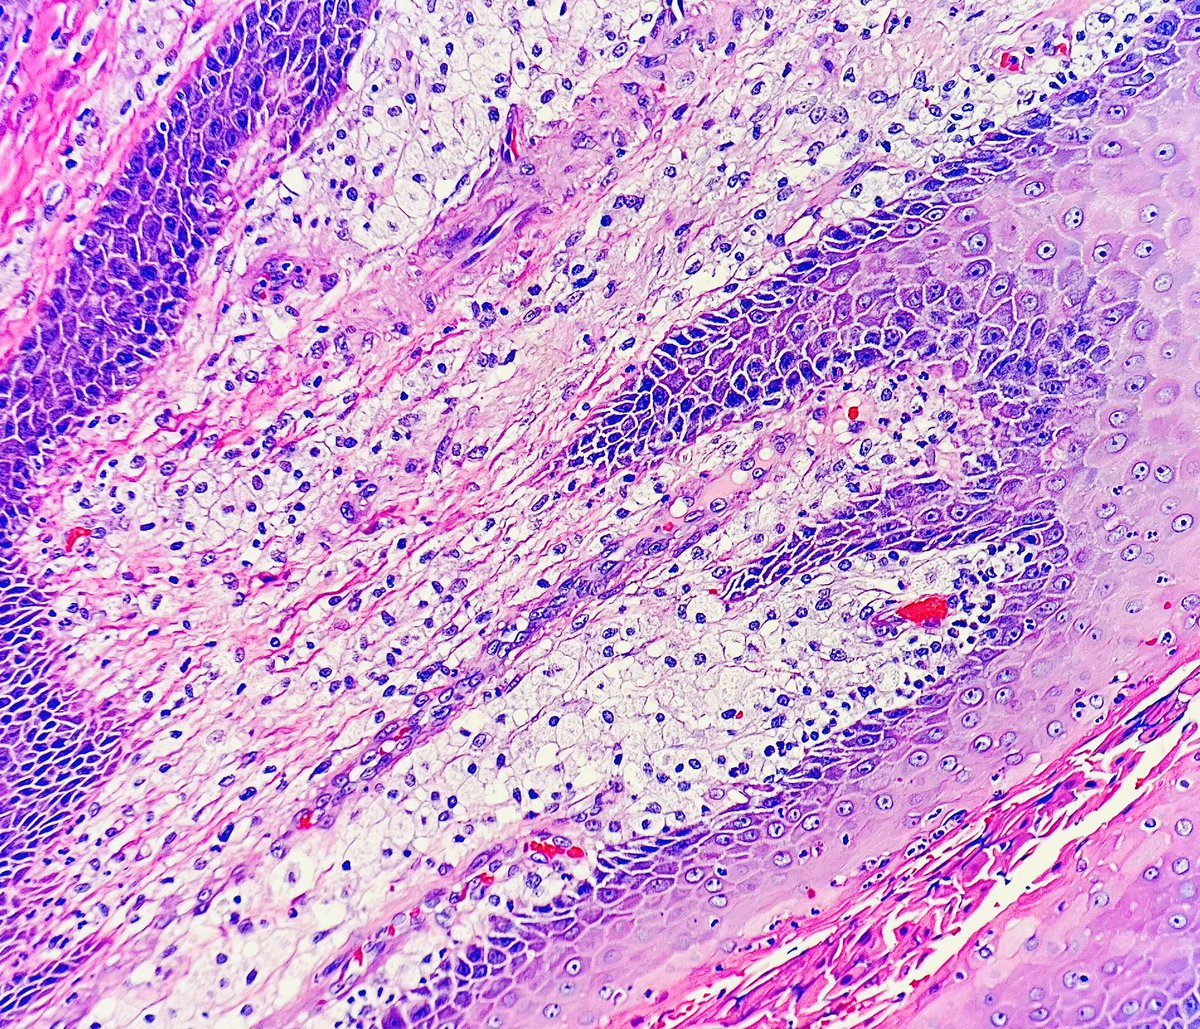 Adding closer picture 🏹 Foamy macrophages within connective tissue papillae 🏹No epithelial atypia 🏹Acute and chronic inflammatory cells 🏹 This is Verruciform Xanthoma #PathTwitter #dermtwitter #dermpath